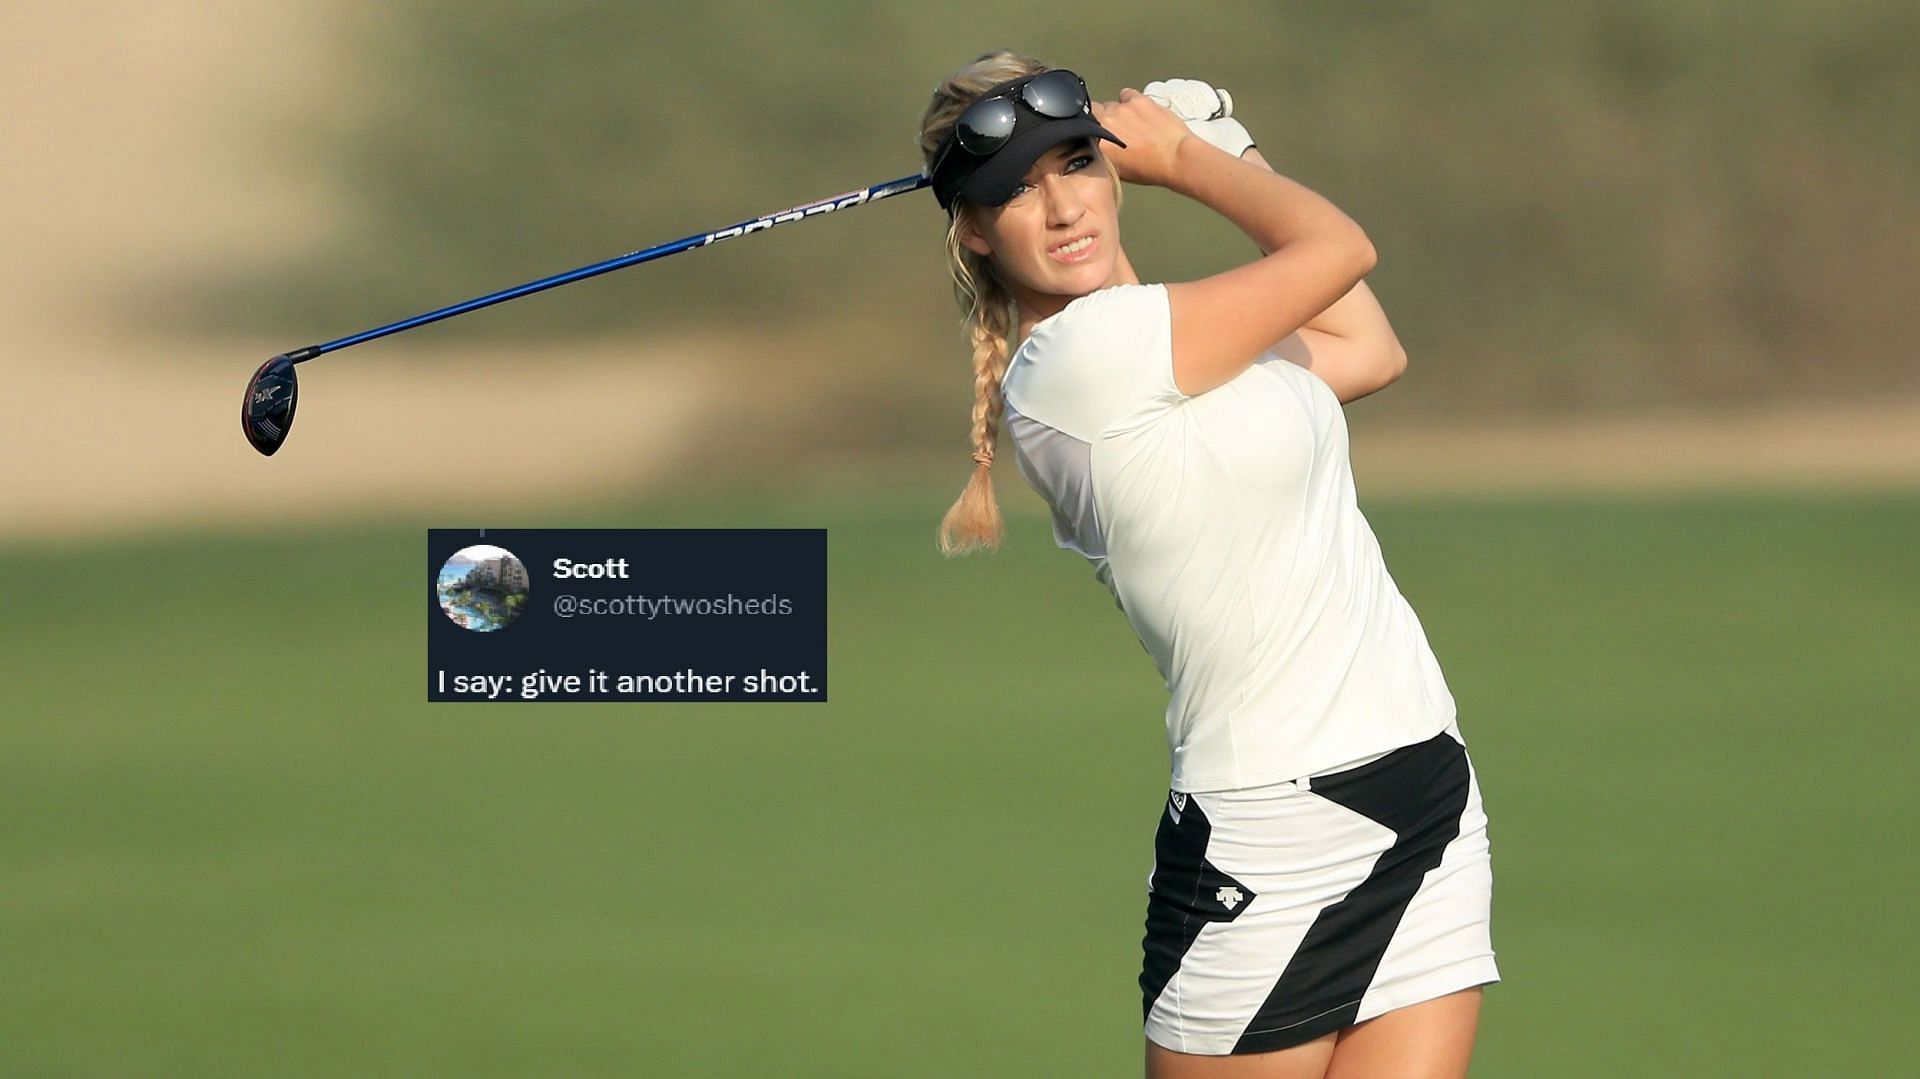 Paige Spiranac said people still ask her if she can break 80